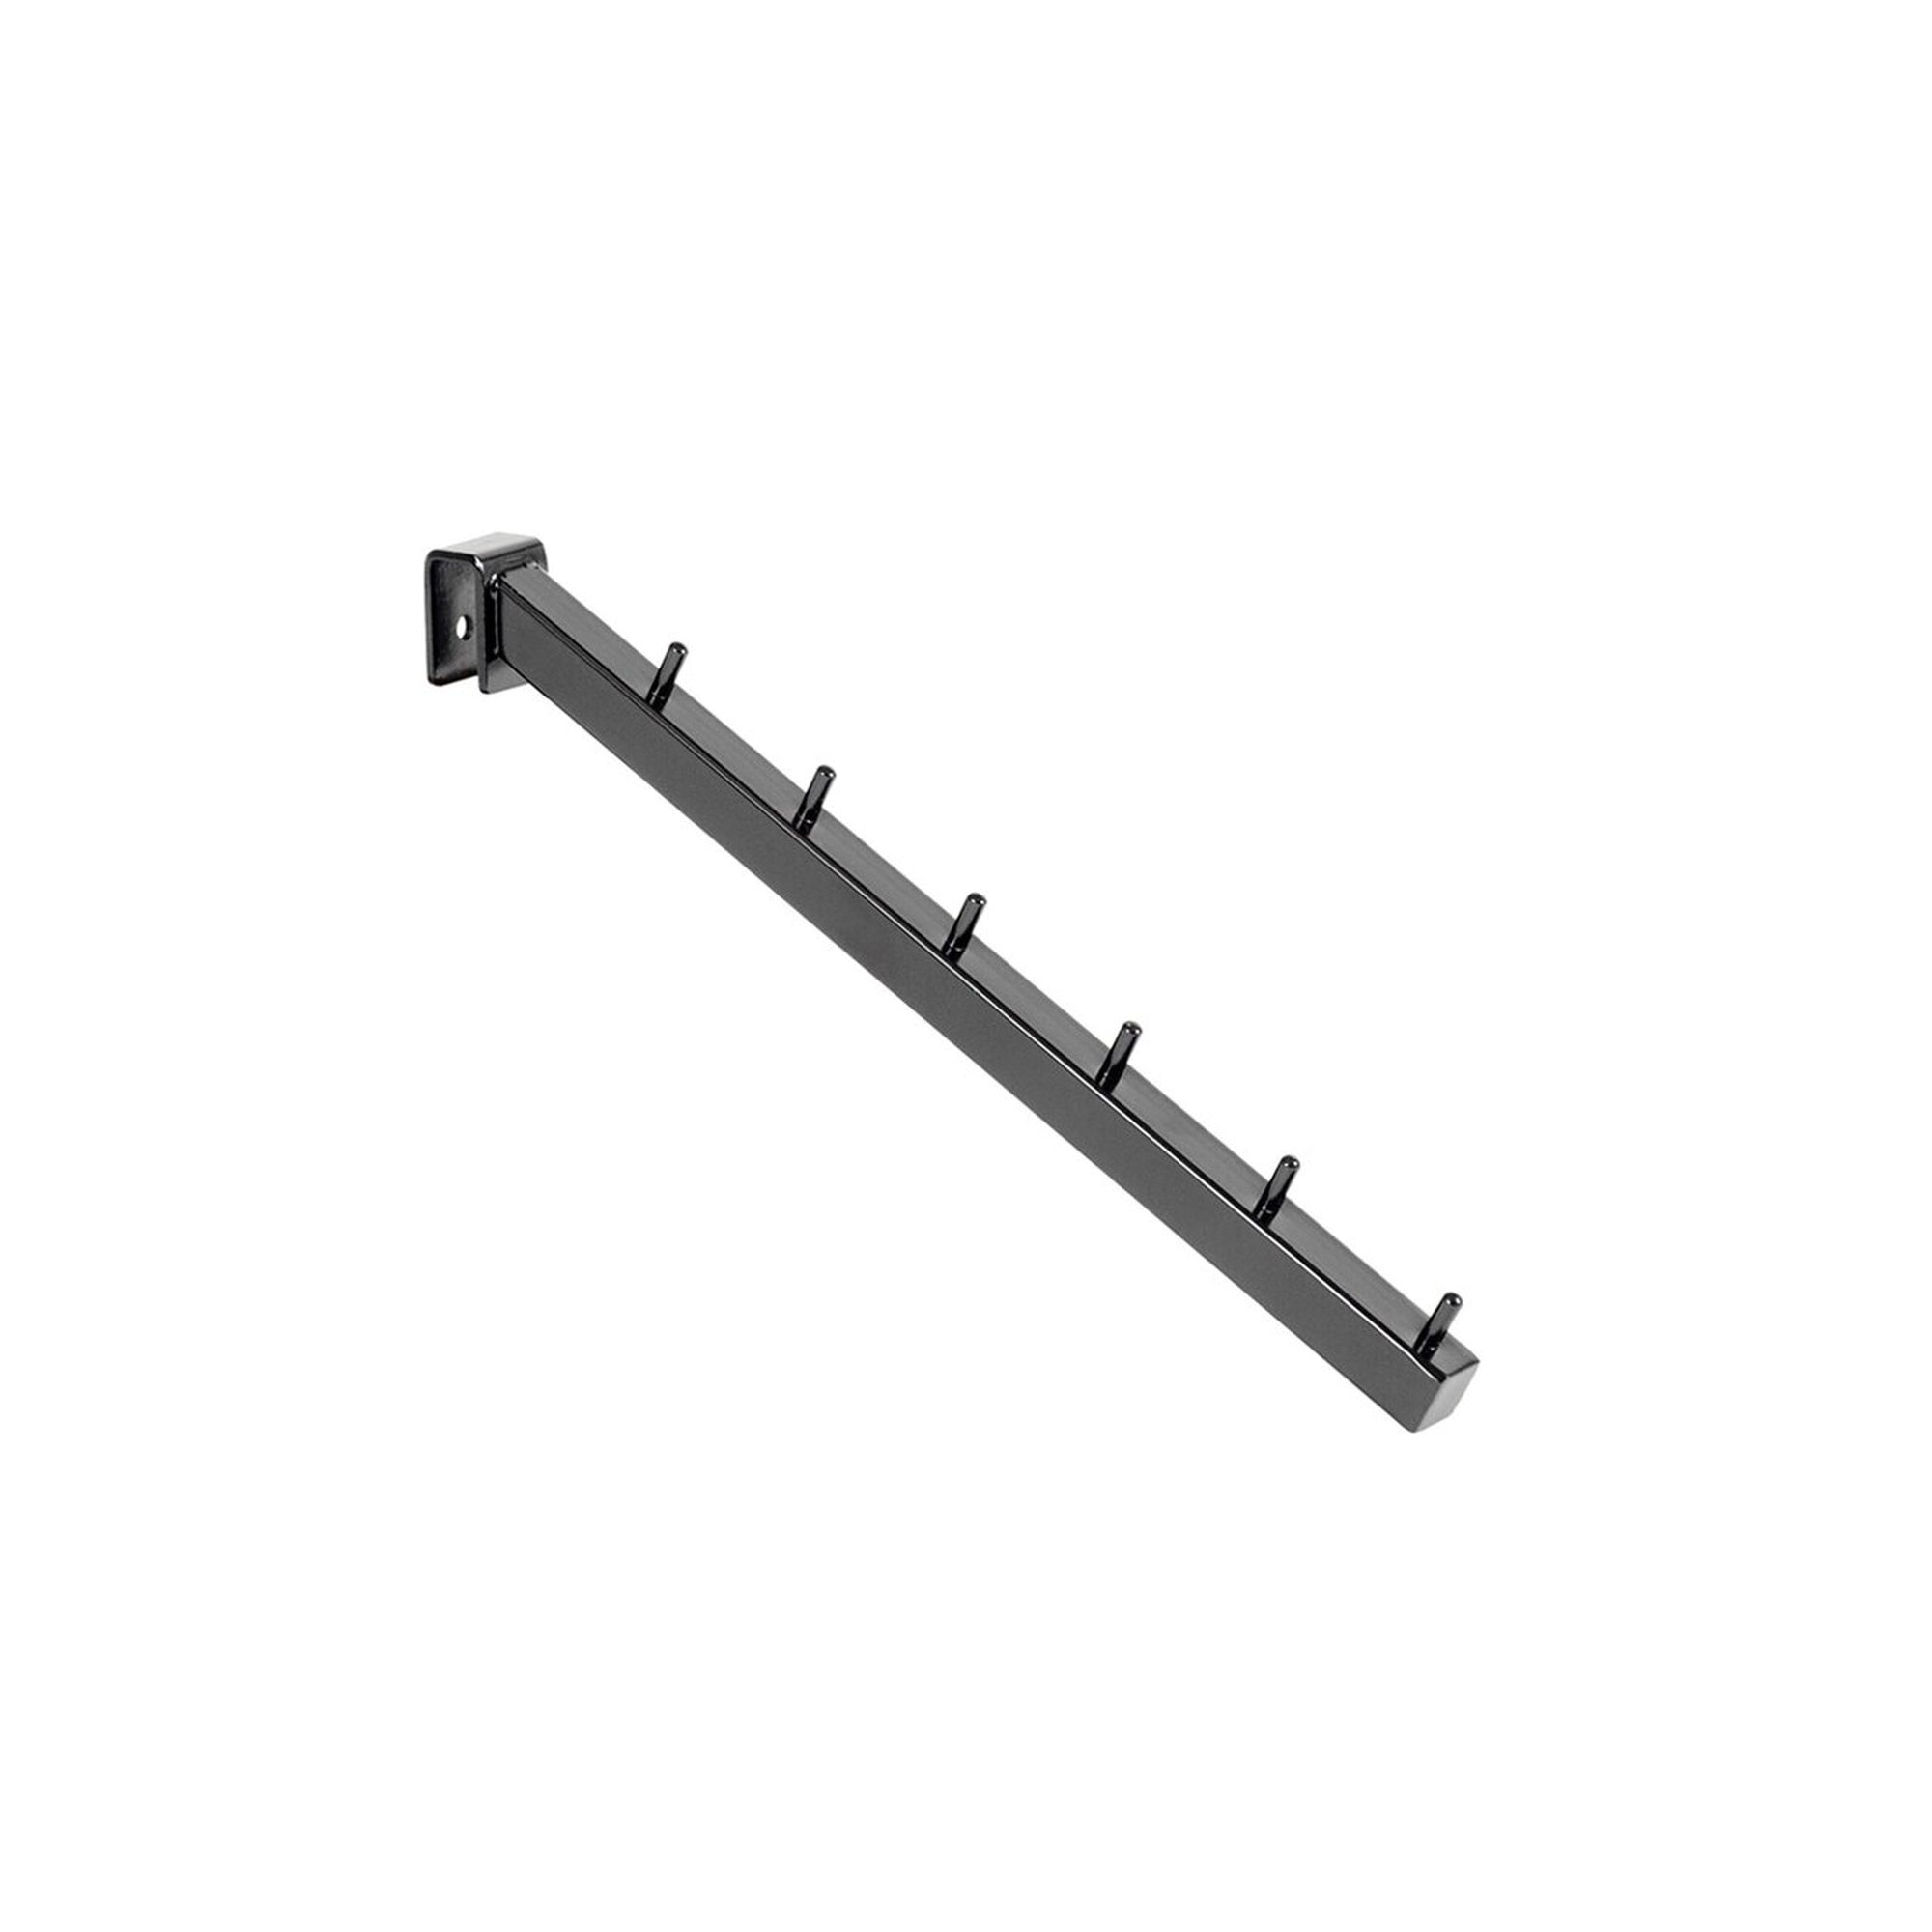 MAXe Backrail Waterfall Arm with 6 Pins - L310